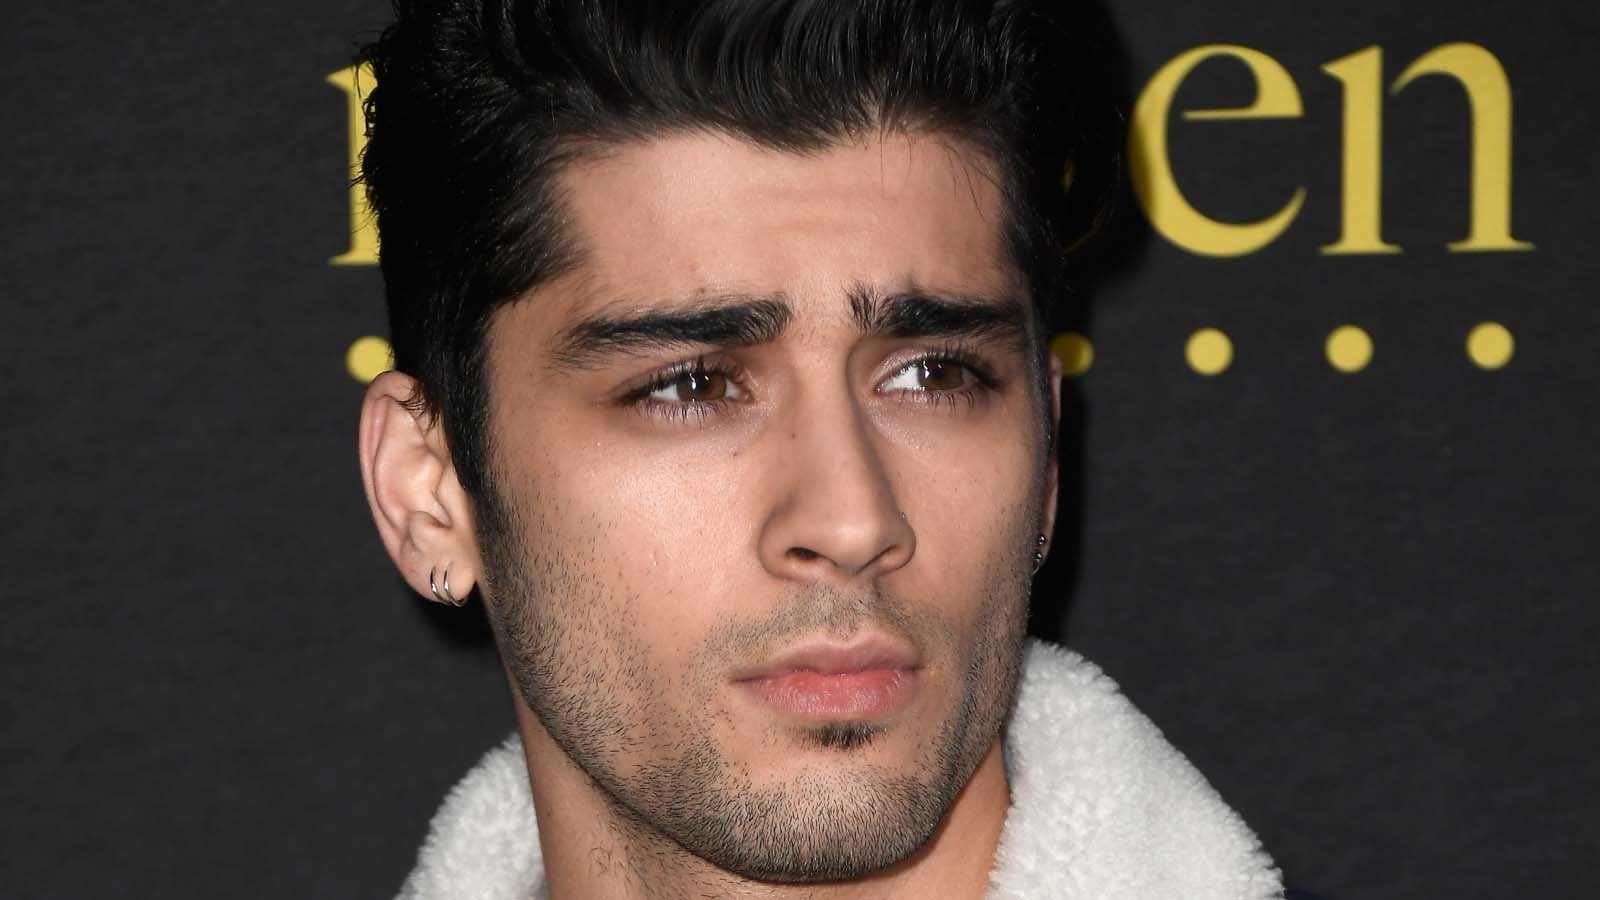 Zayn Malik has been profiled by airport security — but he's not angry about it - Los Angeles Times